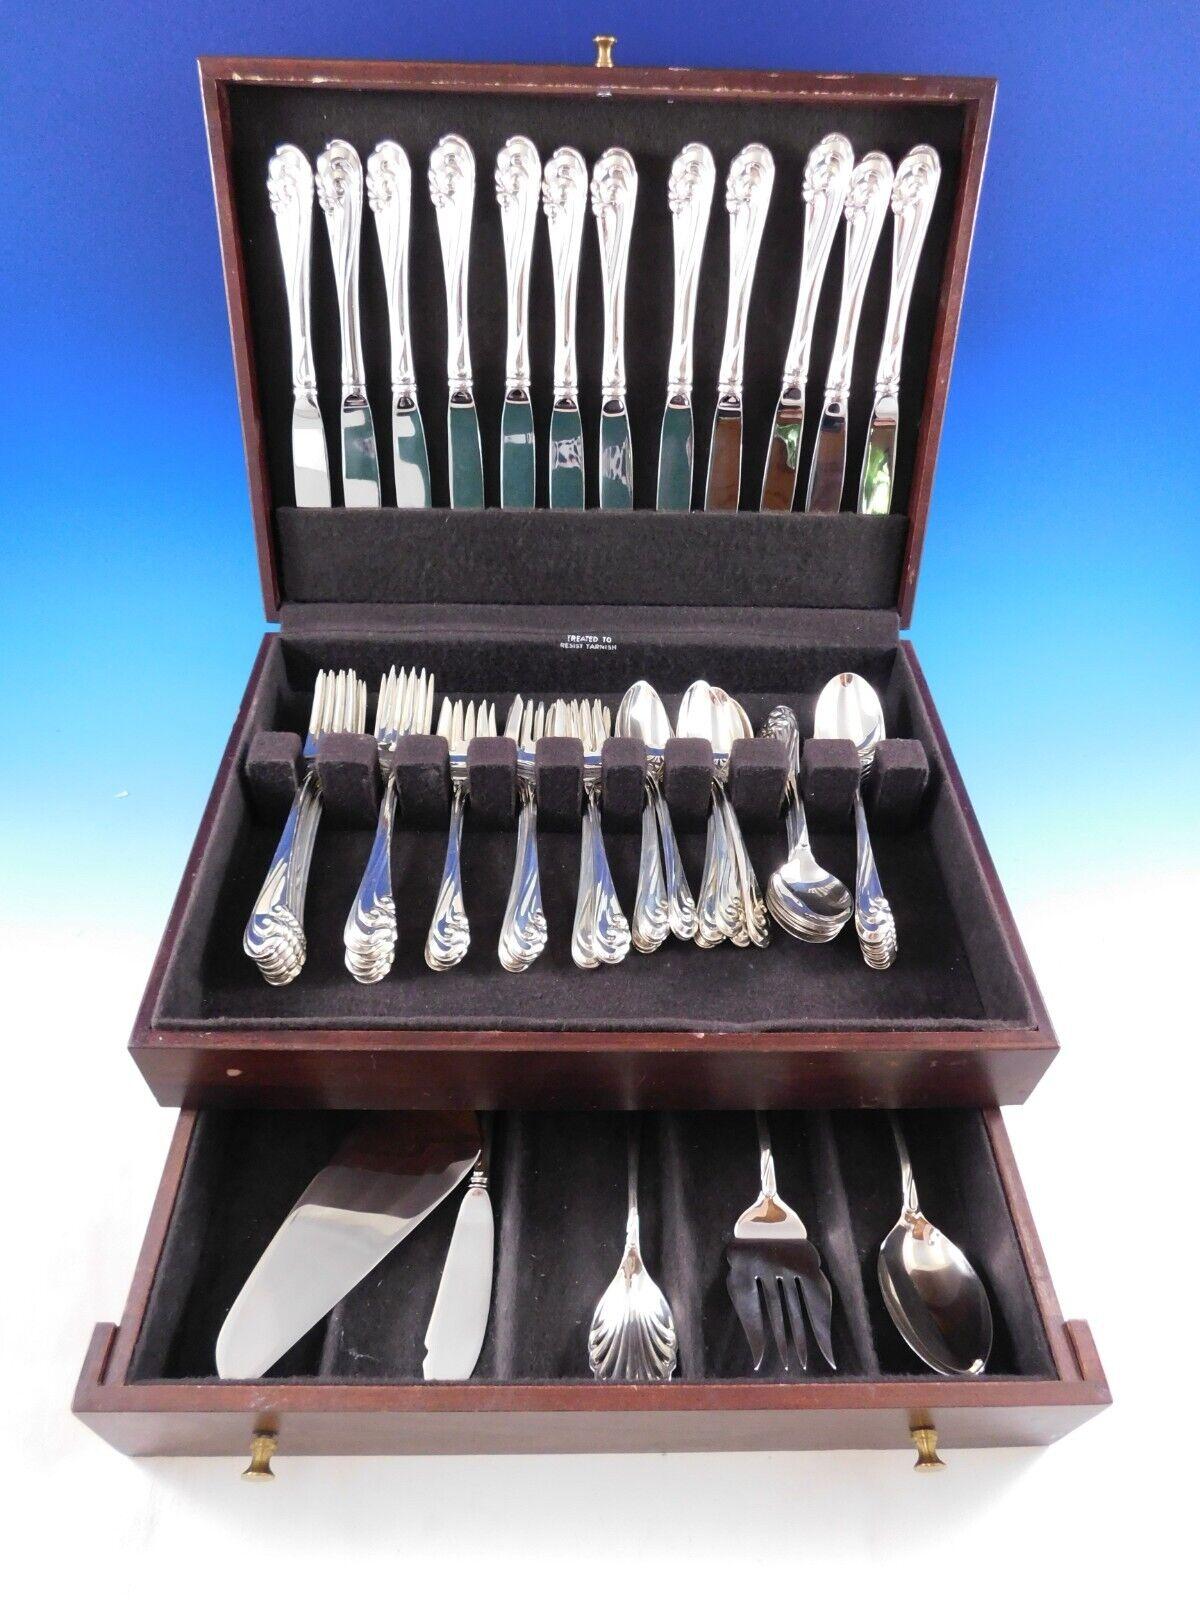 Dancing Surf by Kirk sterling silver Flatware set, 65 pieces. This set includes:

12 Knives, 9